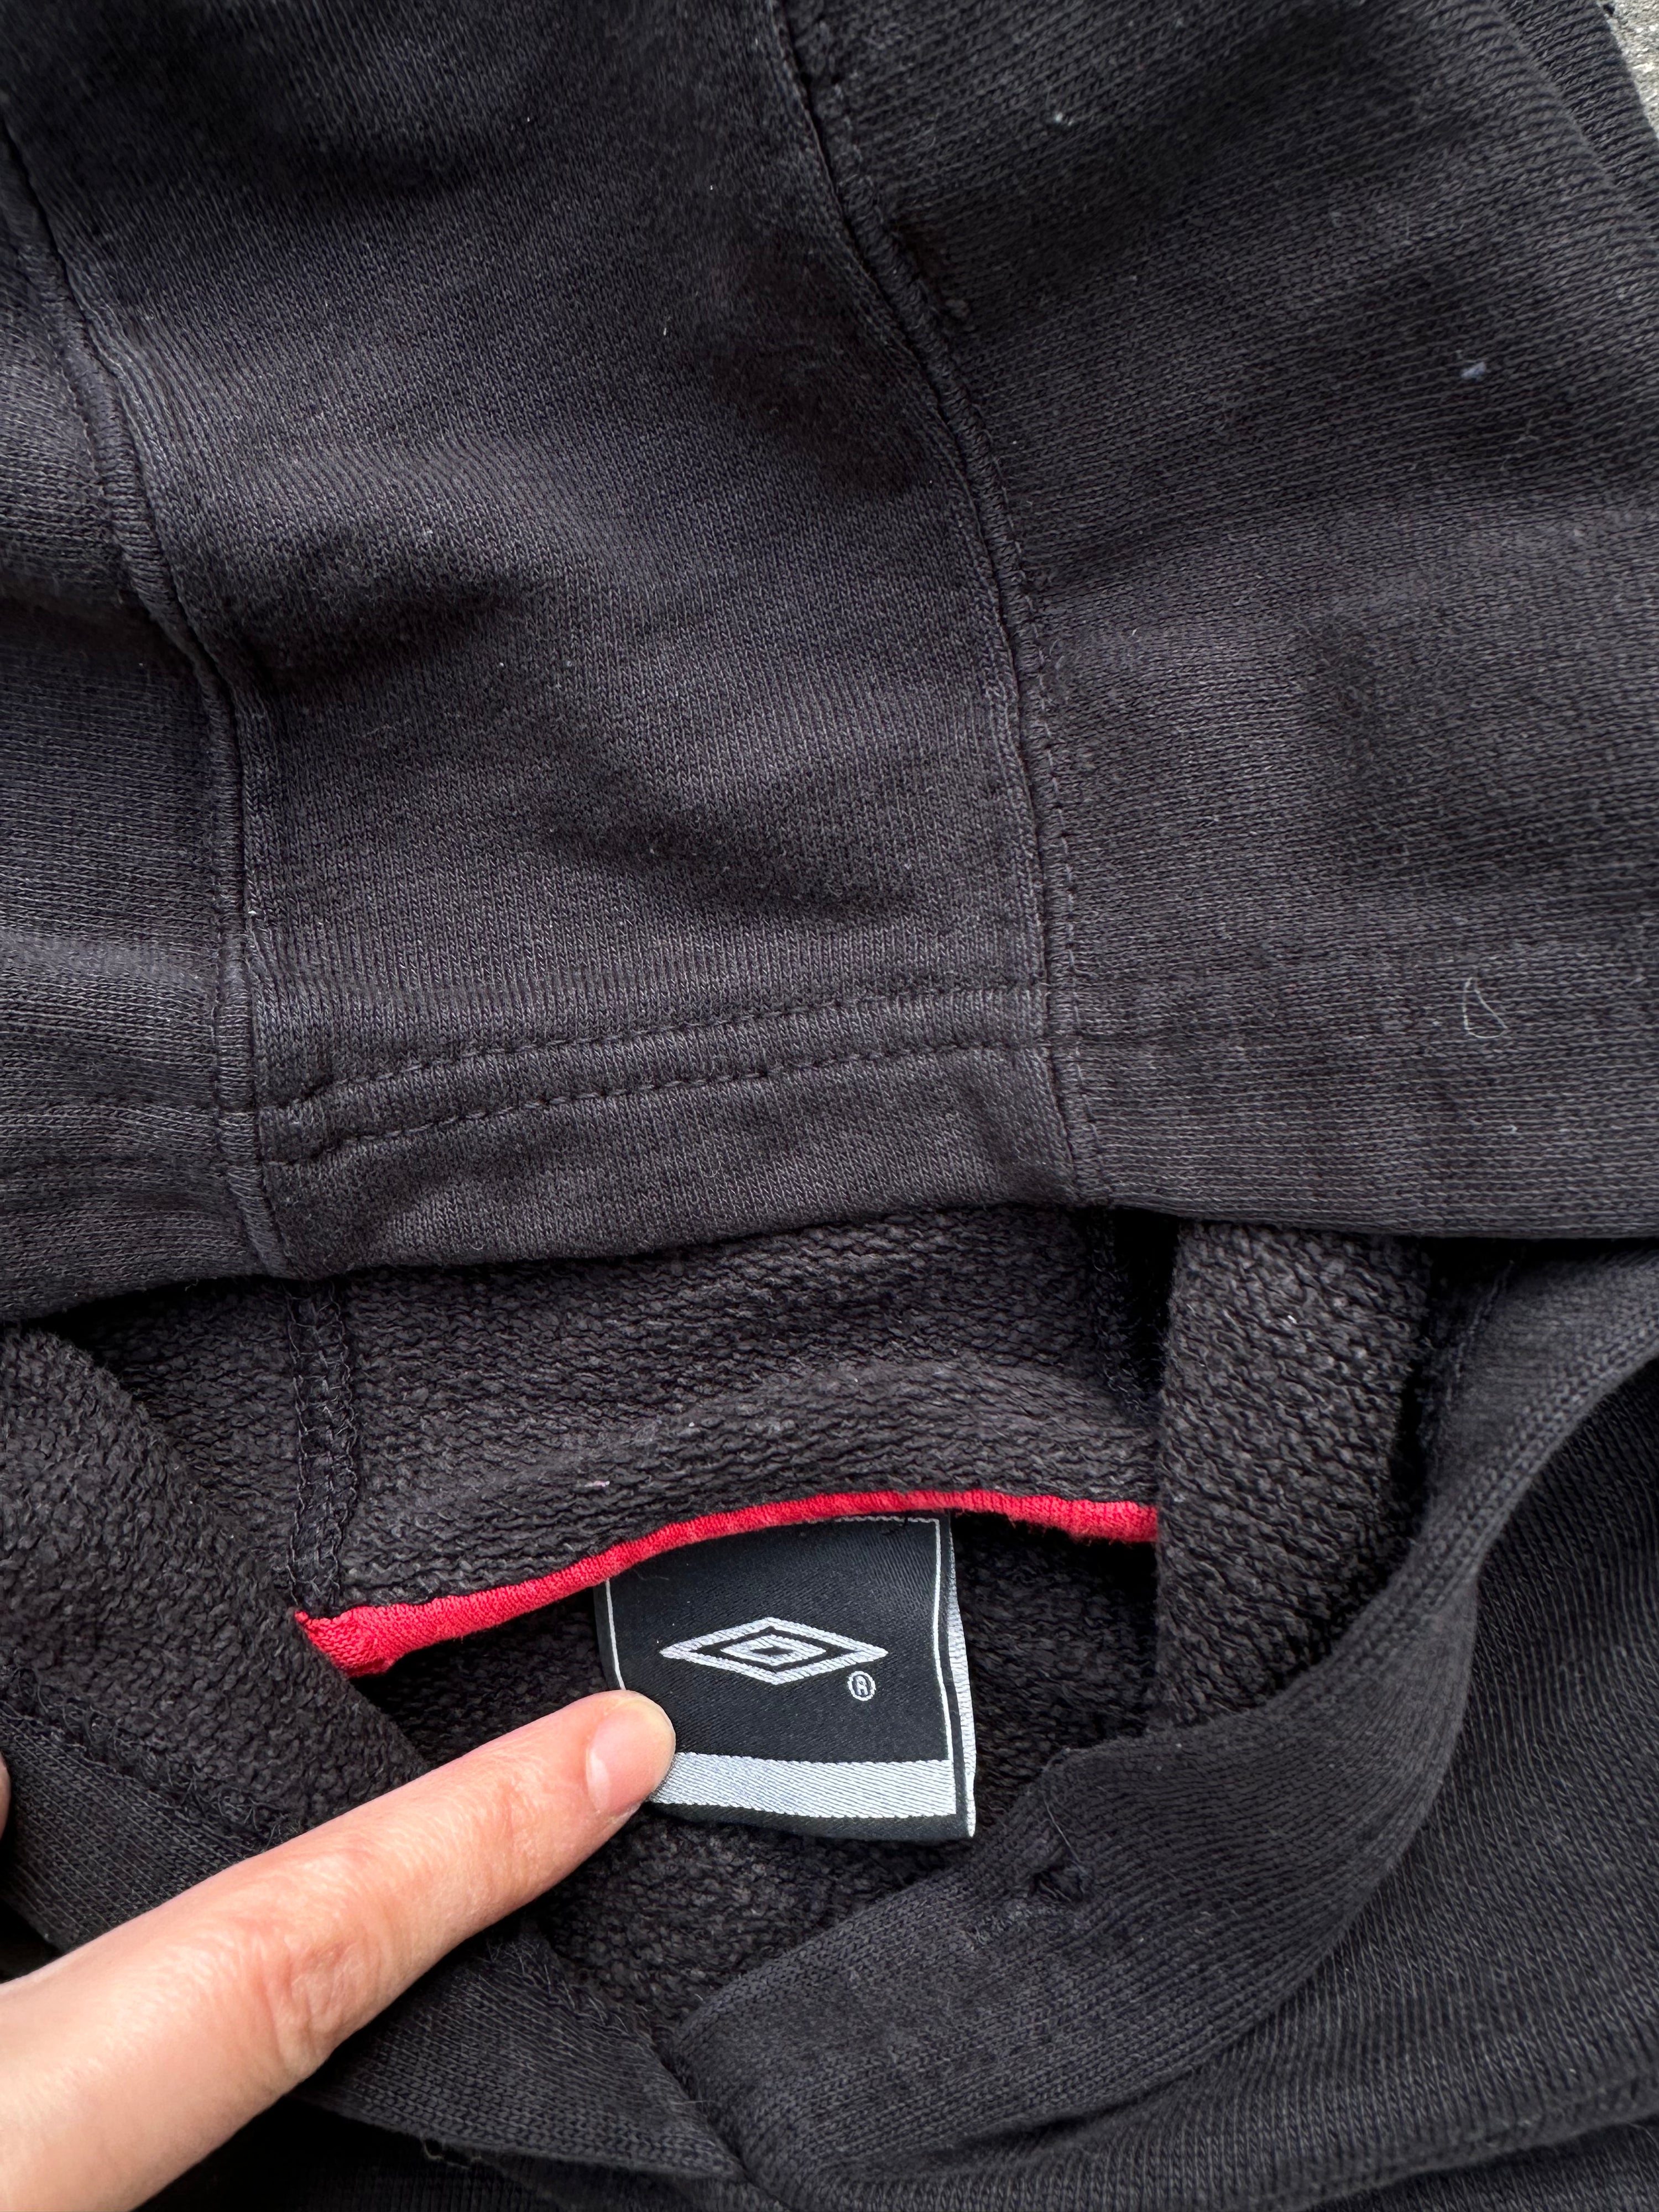 Umbro embroidered Hoodie (L)